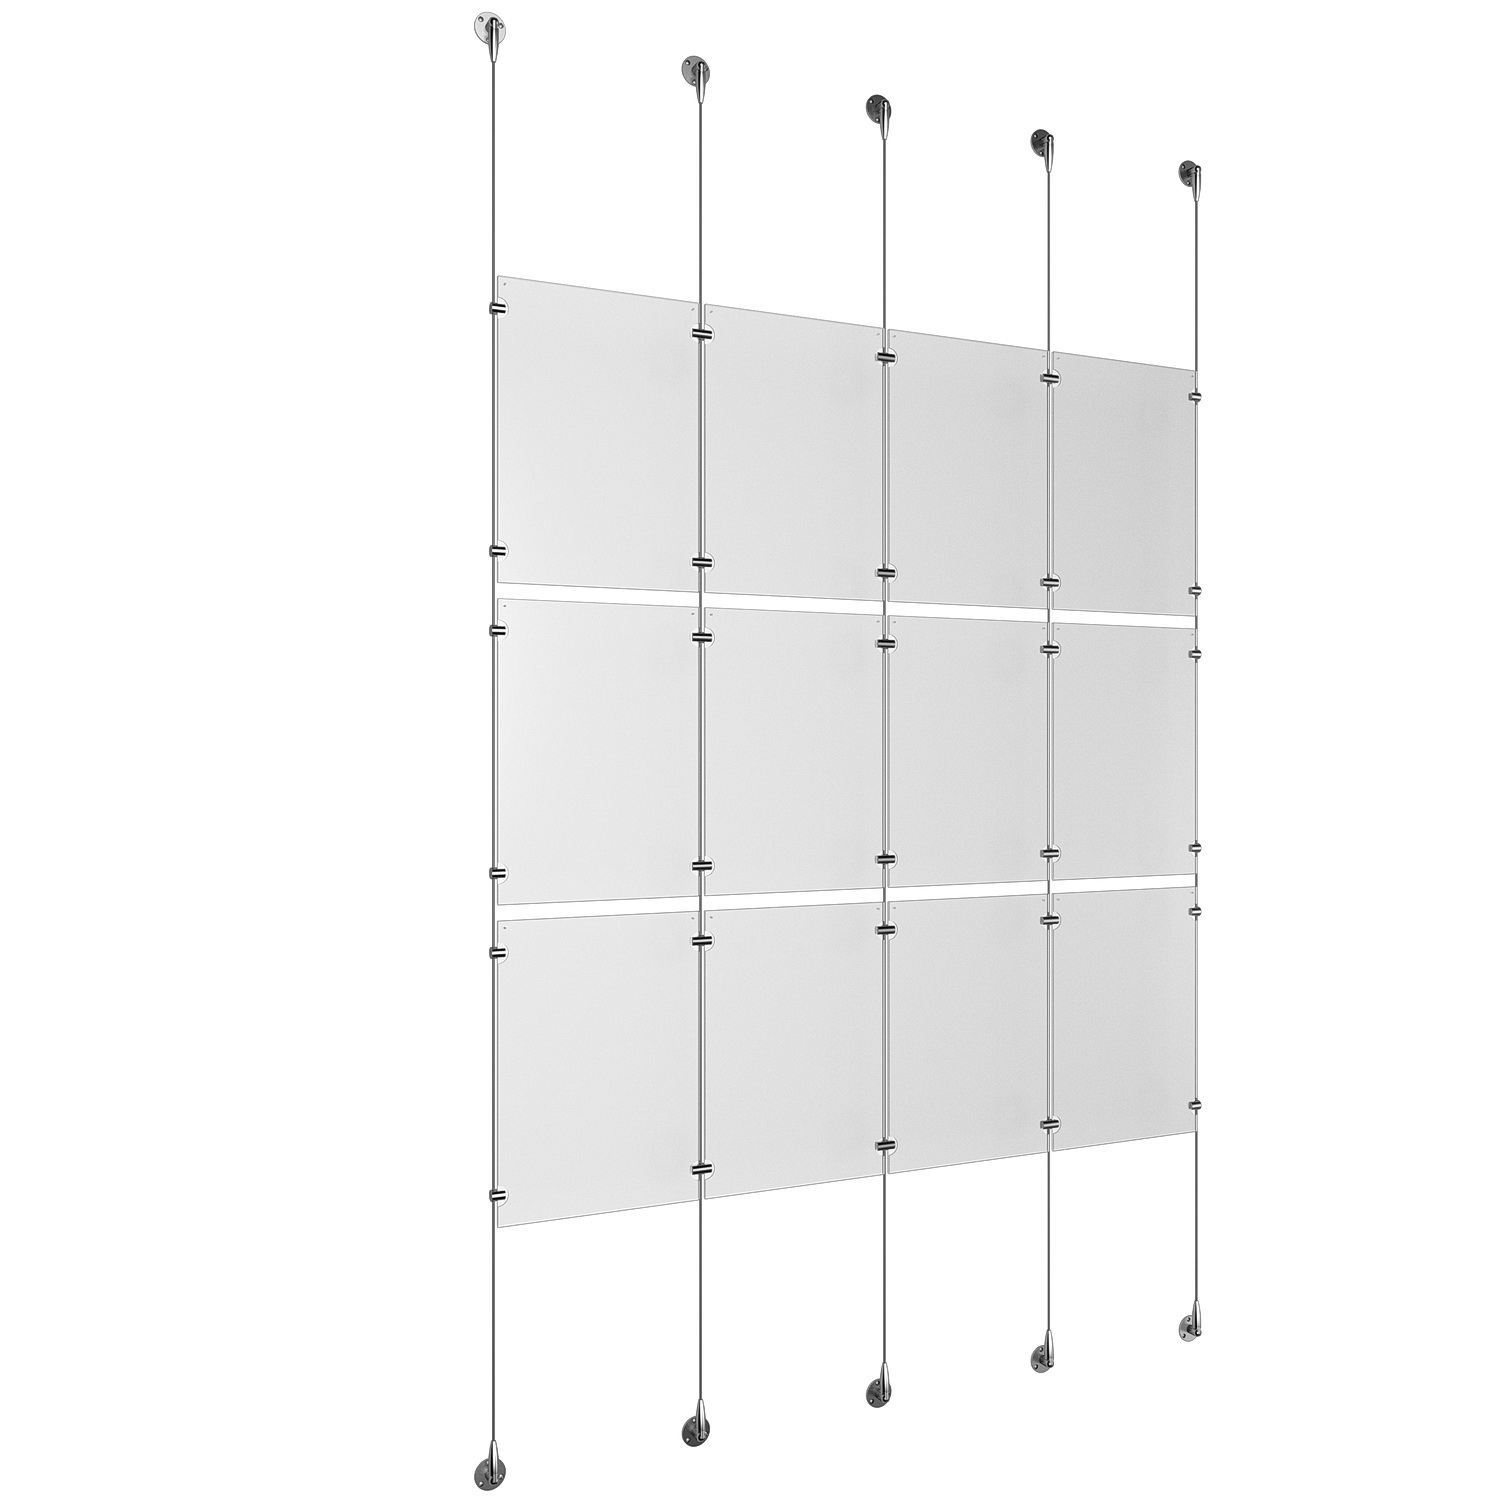 (12) 11'' Width x 17'' Height Clear Acrylic Frame & (5) Stainless Steel Satin Brushed Adjustable Angle Signature 1/8'' Cable Systems with (12) Single-Sided Panel Grippers (18) Double-Sided Panel Grippers